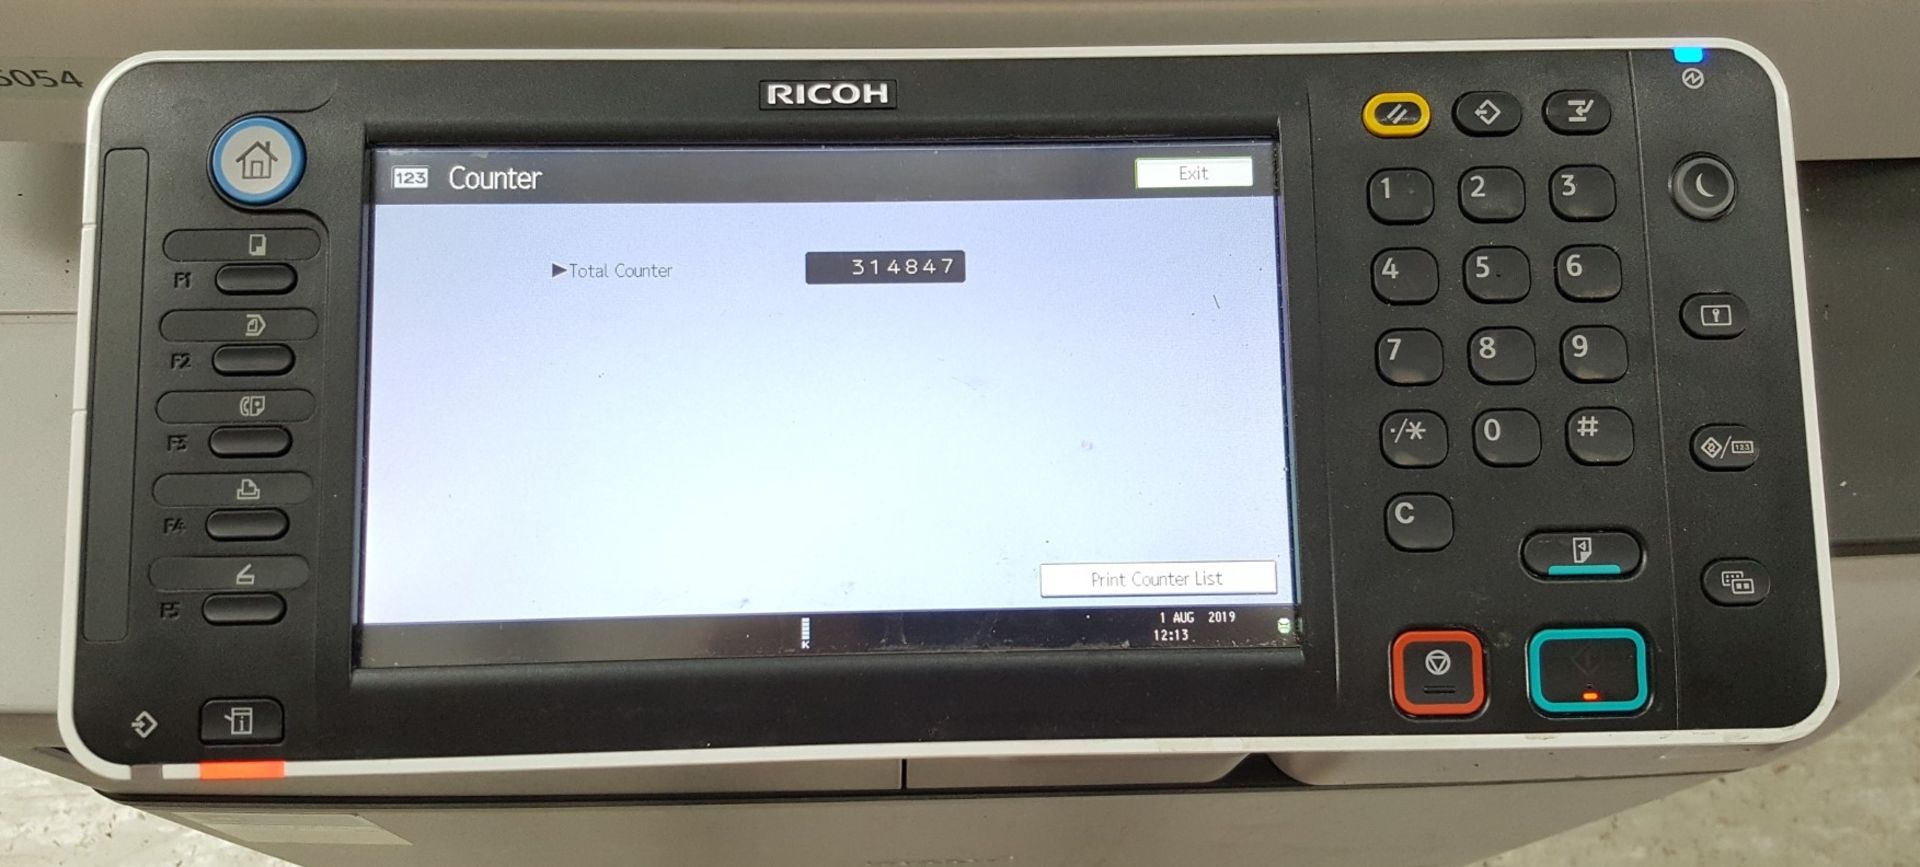 1 x RICOH MP 5054 Black and White Laser Multifunction Office Printer - Ref BY213 - Image 4 of 5